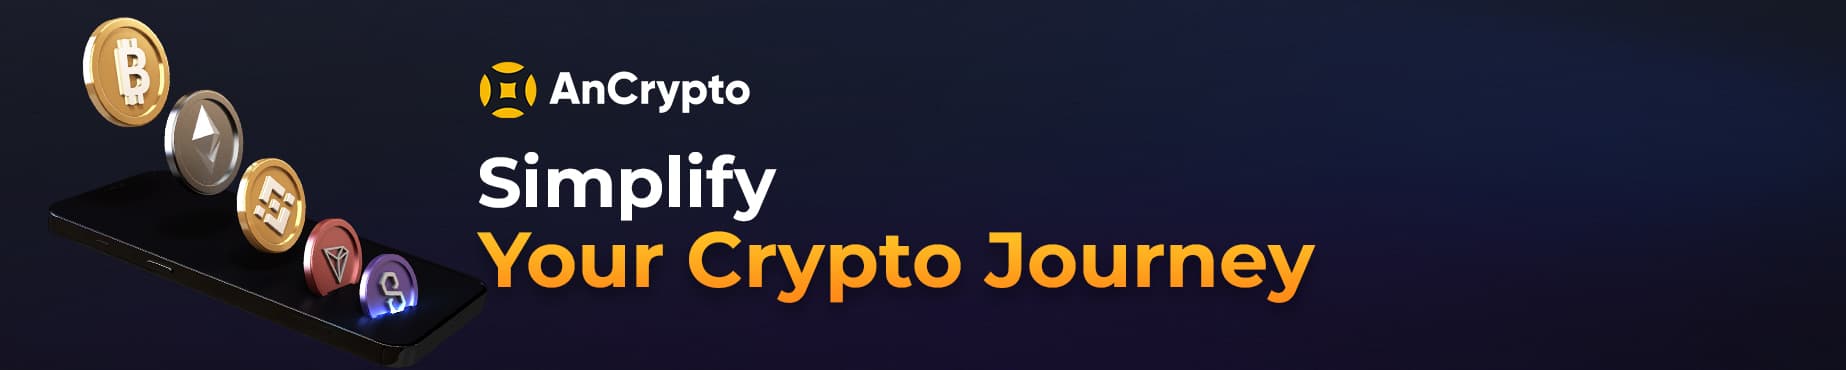 Simplify Your Crypto Journey